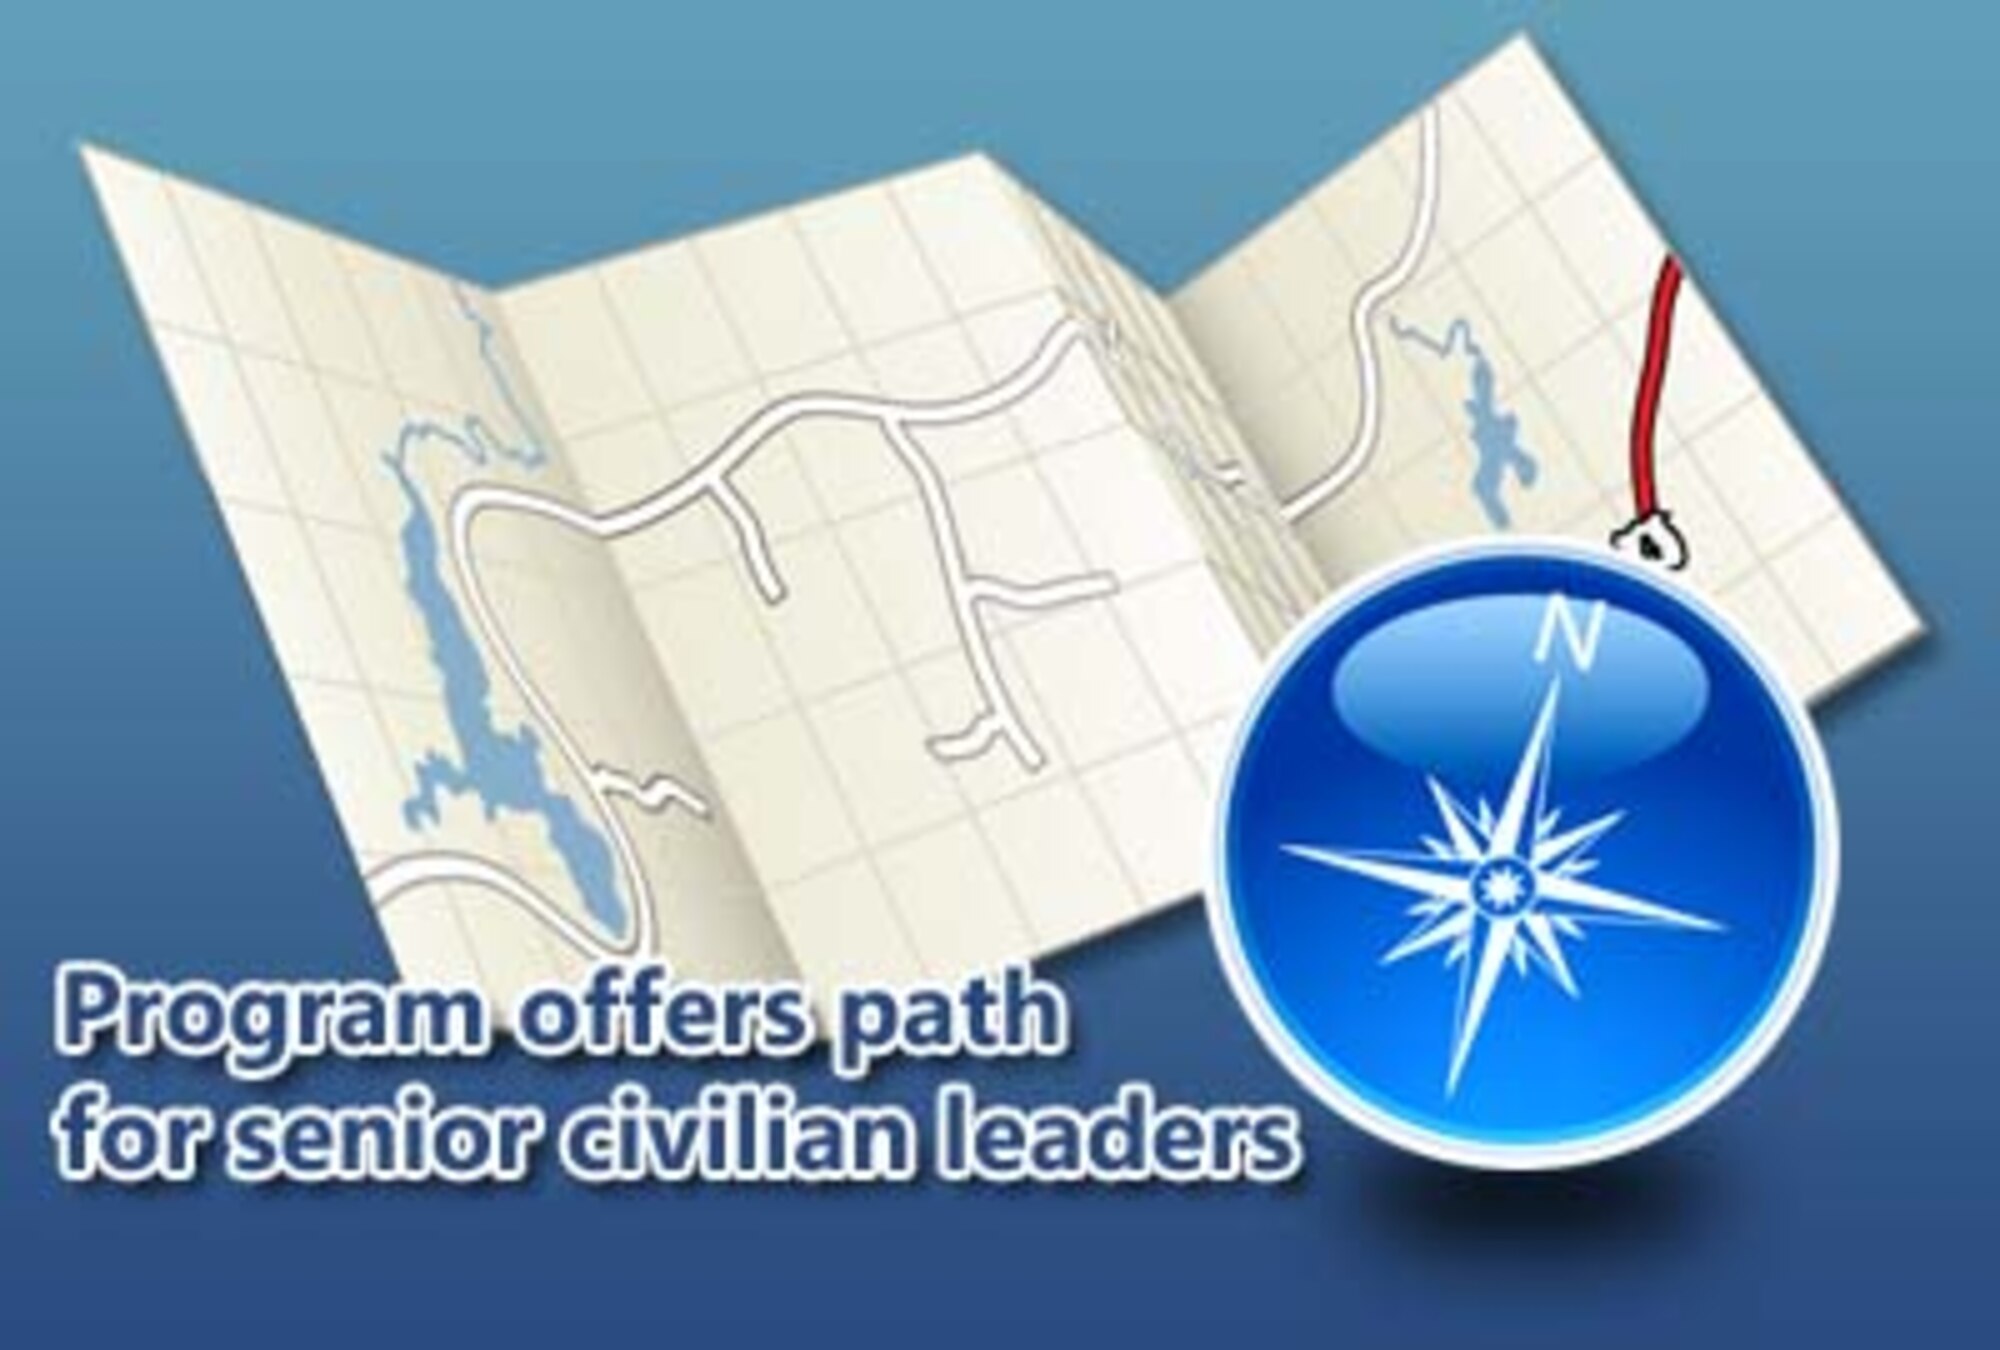 The Civilian Strategic Leader Program was designed to bring civilian senior leader development and career management practices in line with current general officer, senior executive corps and colonel practices. 